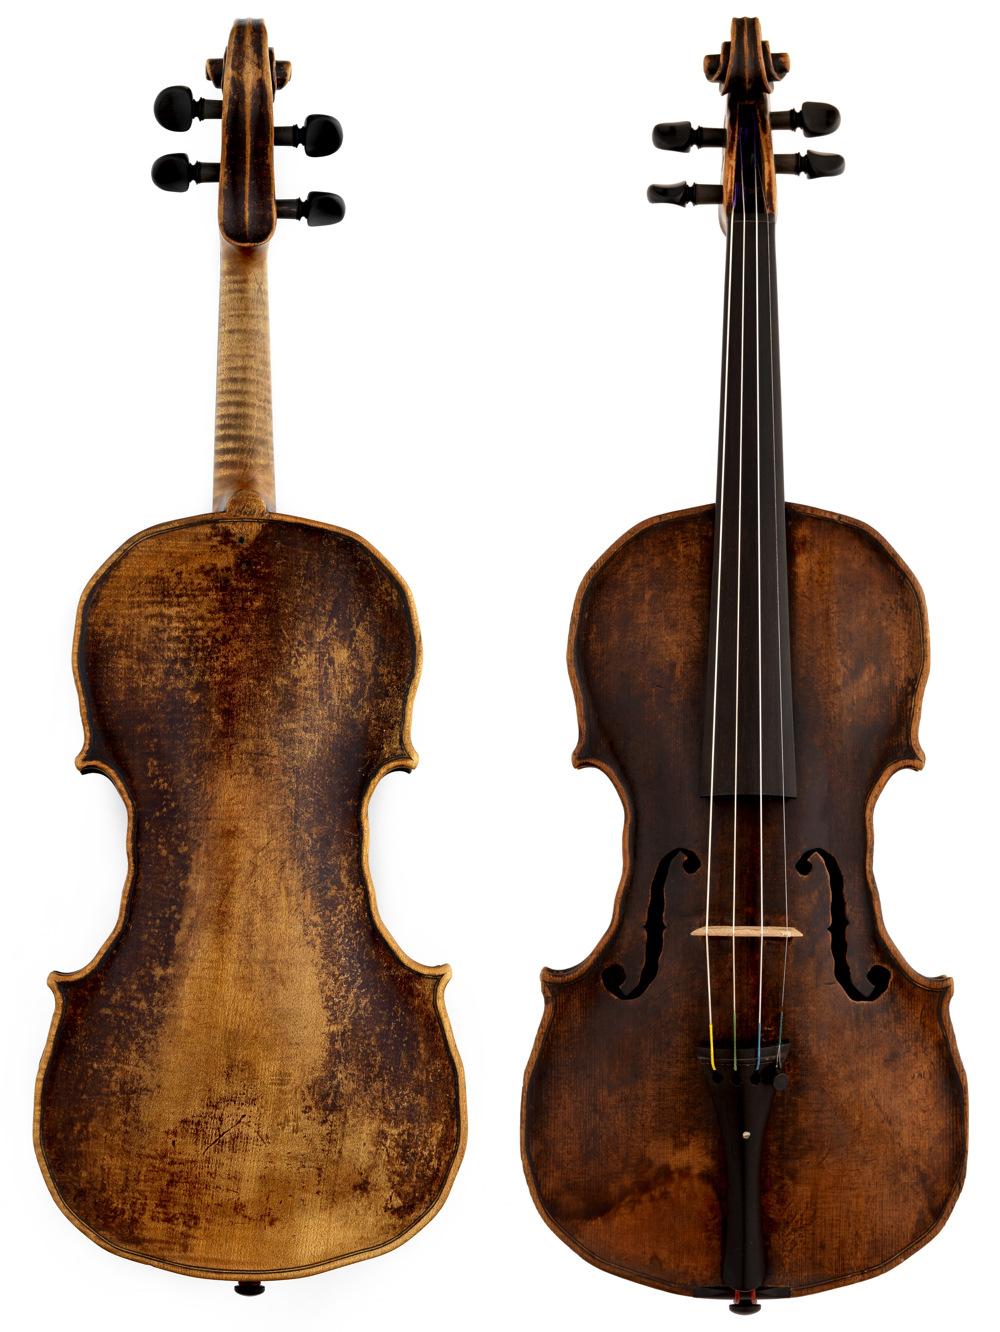 Gedler violin 1775. Photos courtesy of the ChiMei Museum